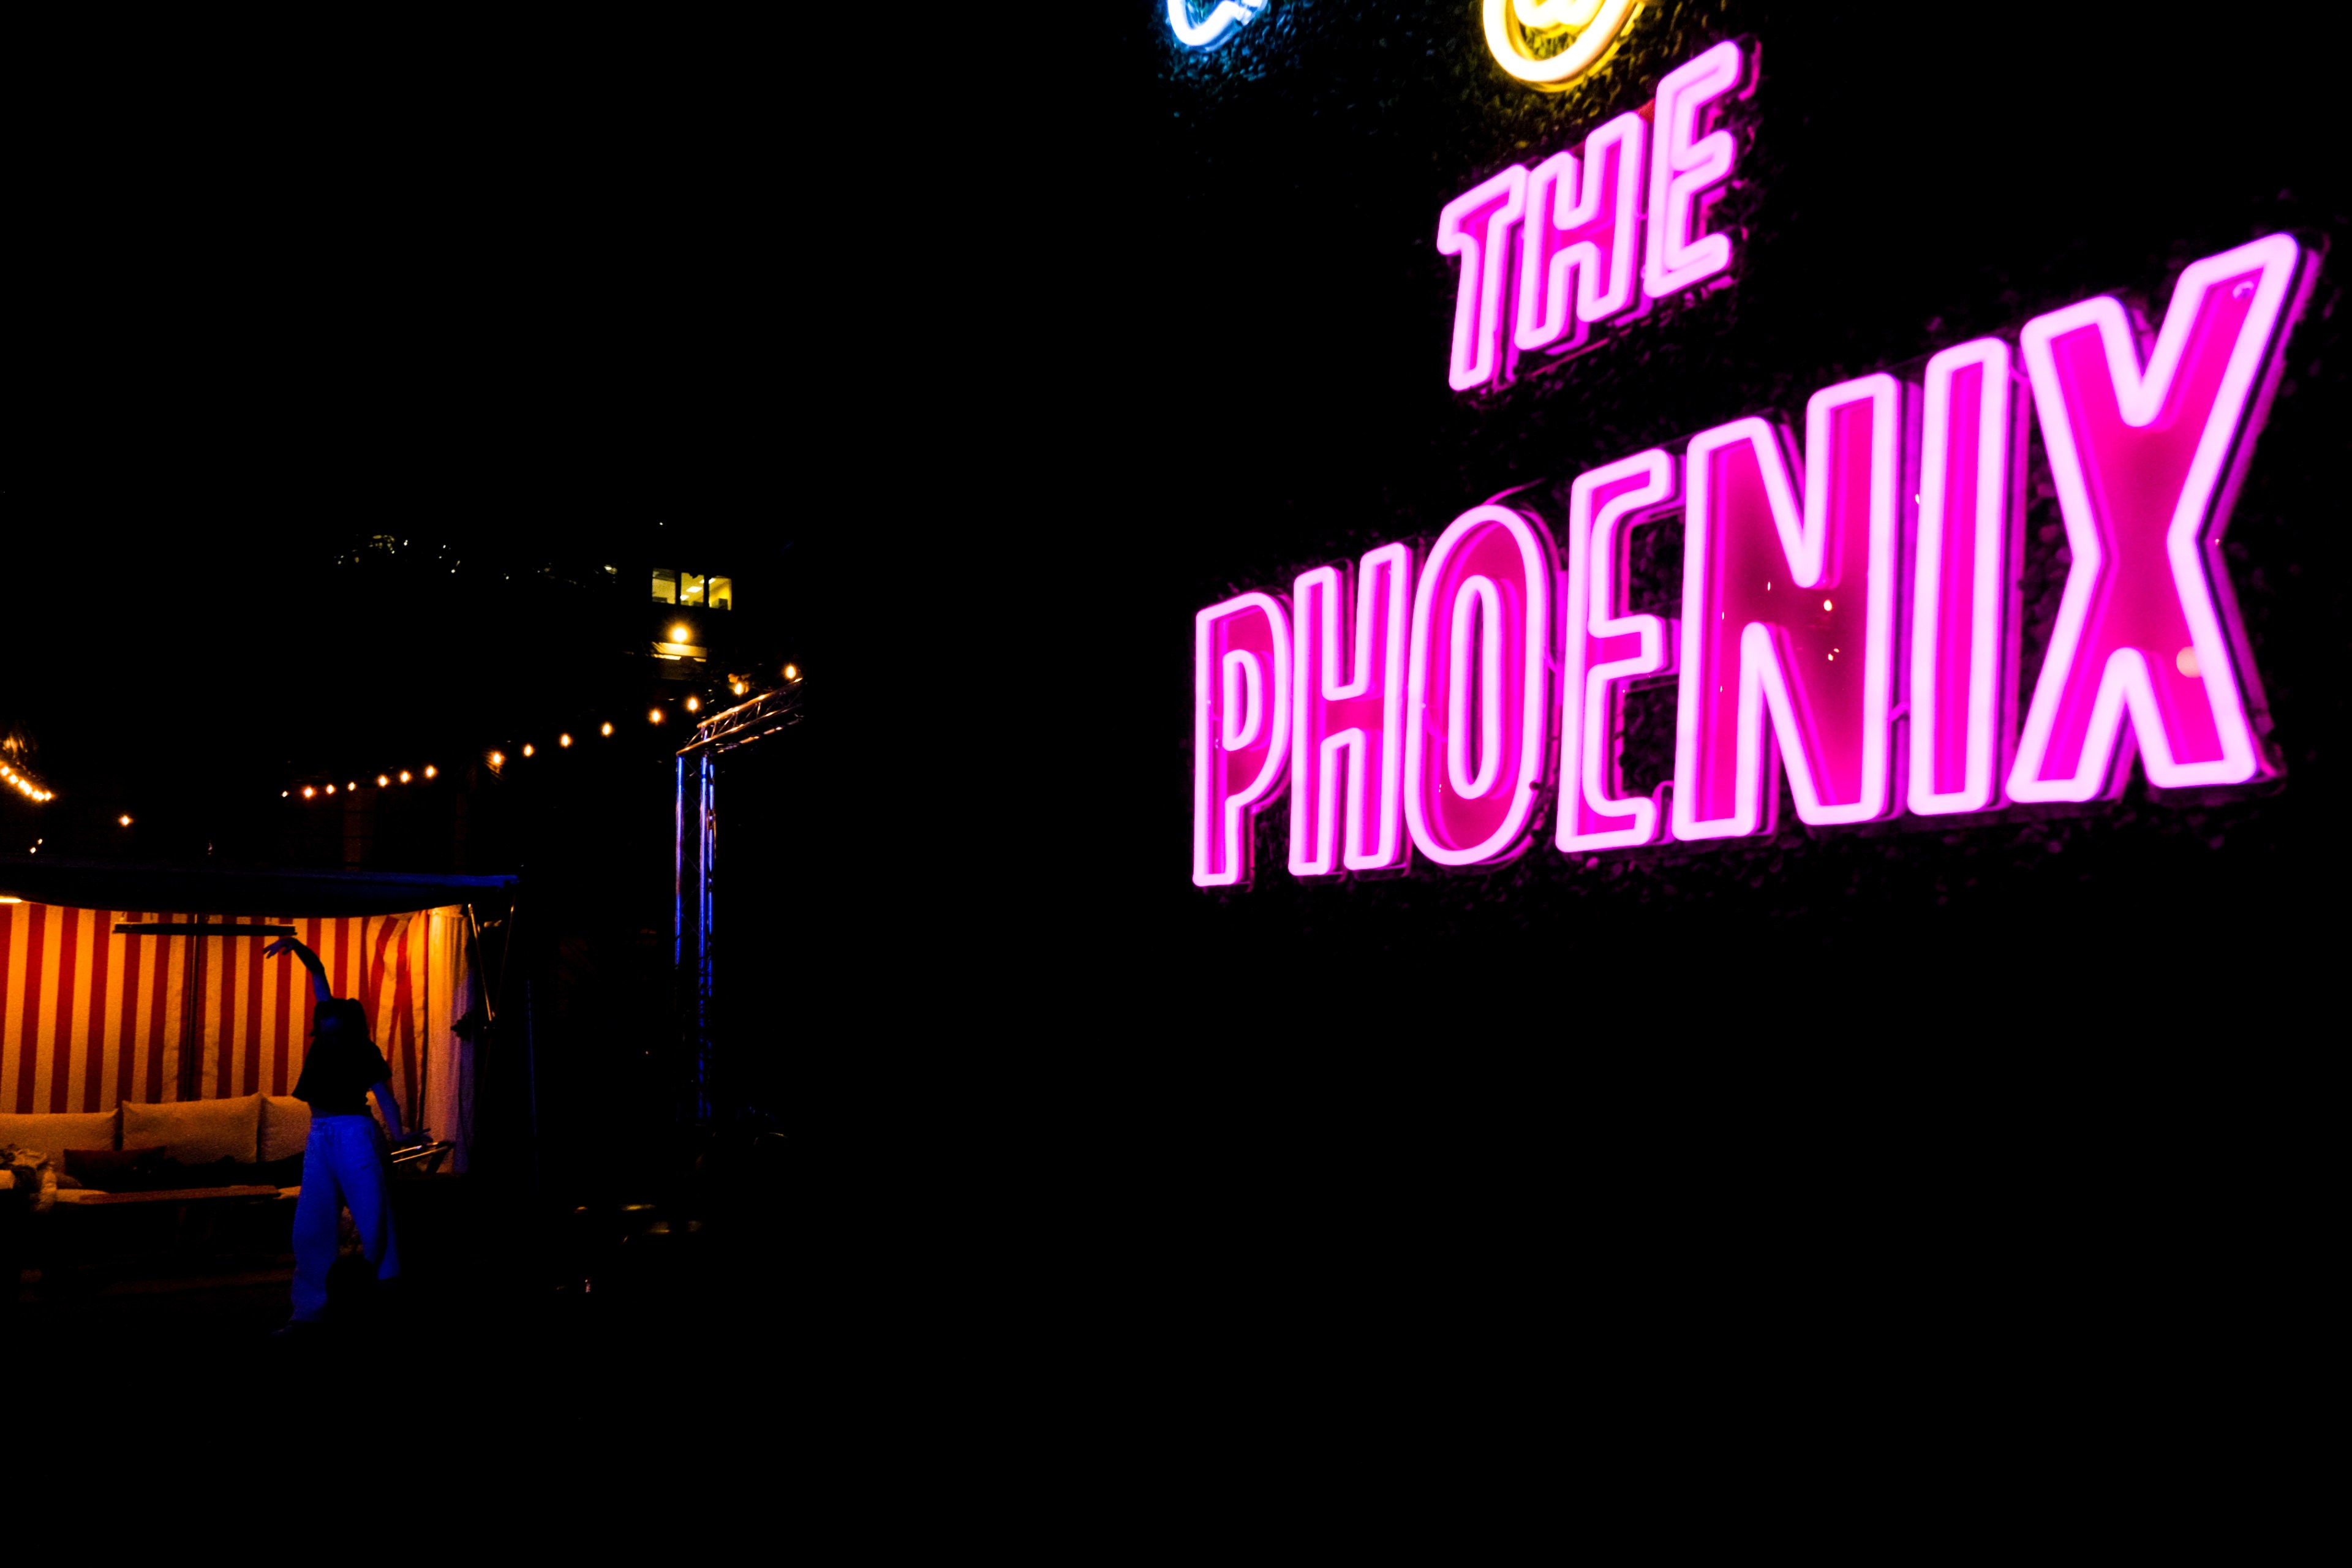 Neon sign reading &quot;THE PHOENIX,&quot; a lit-up tent with a person, and string lights against a dark backdrop.